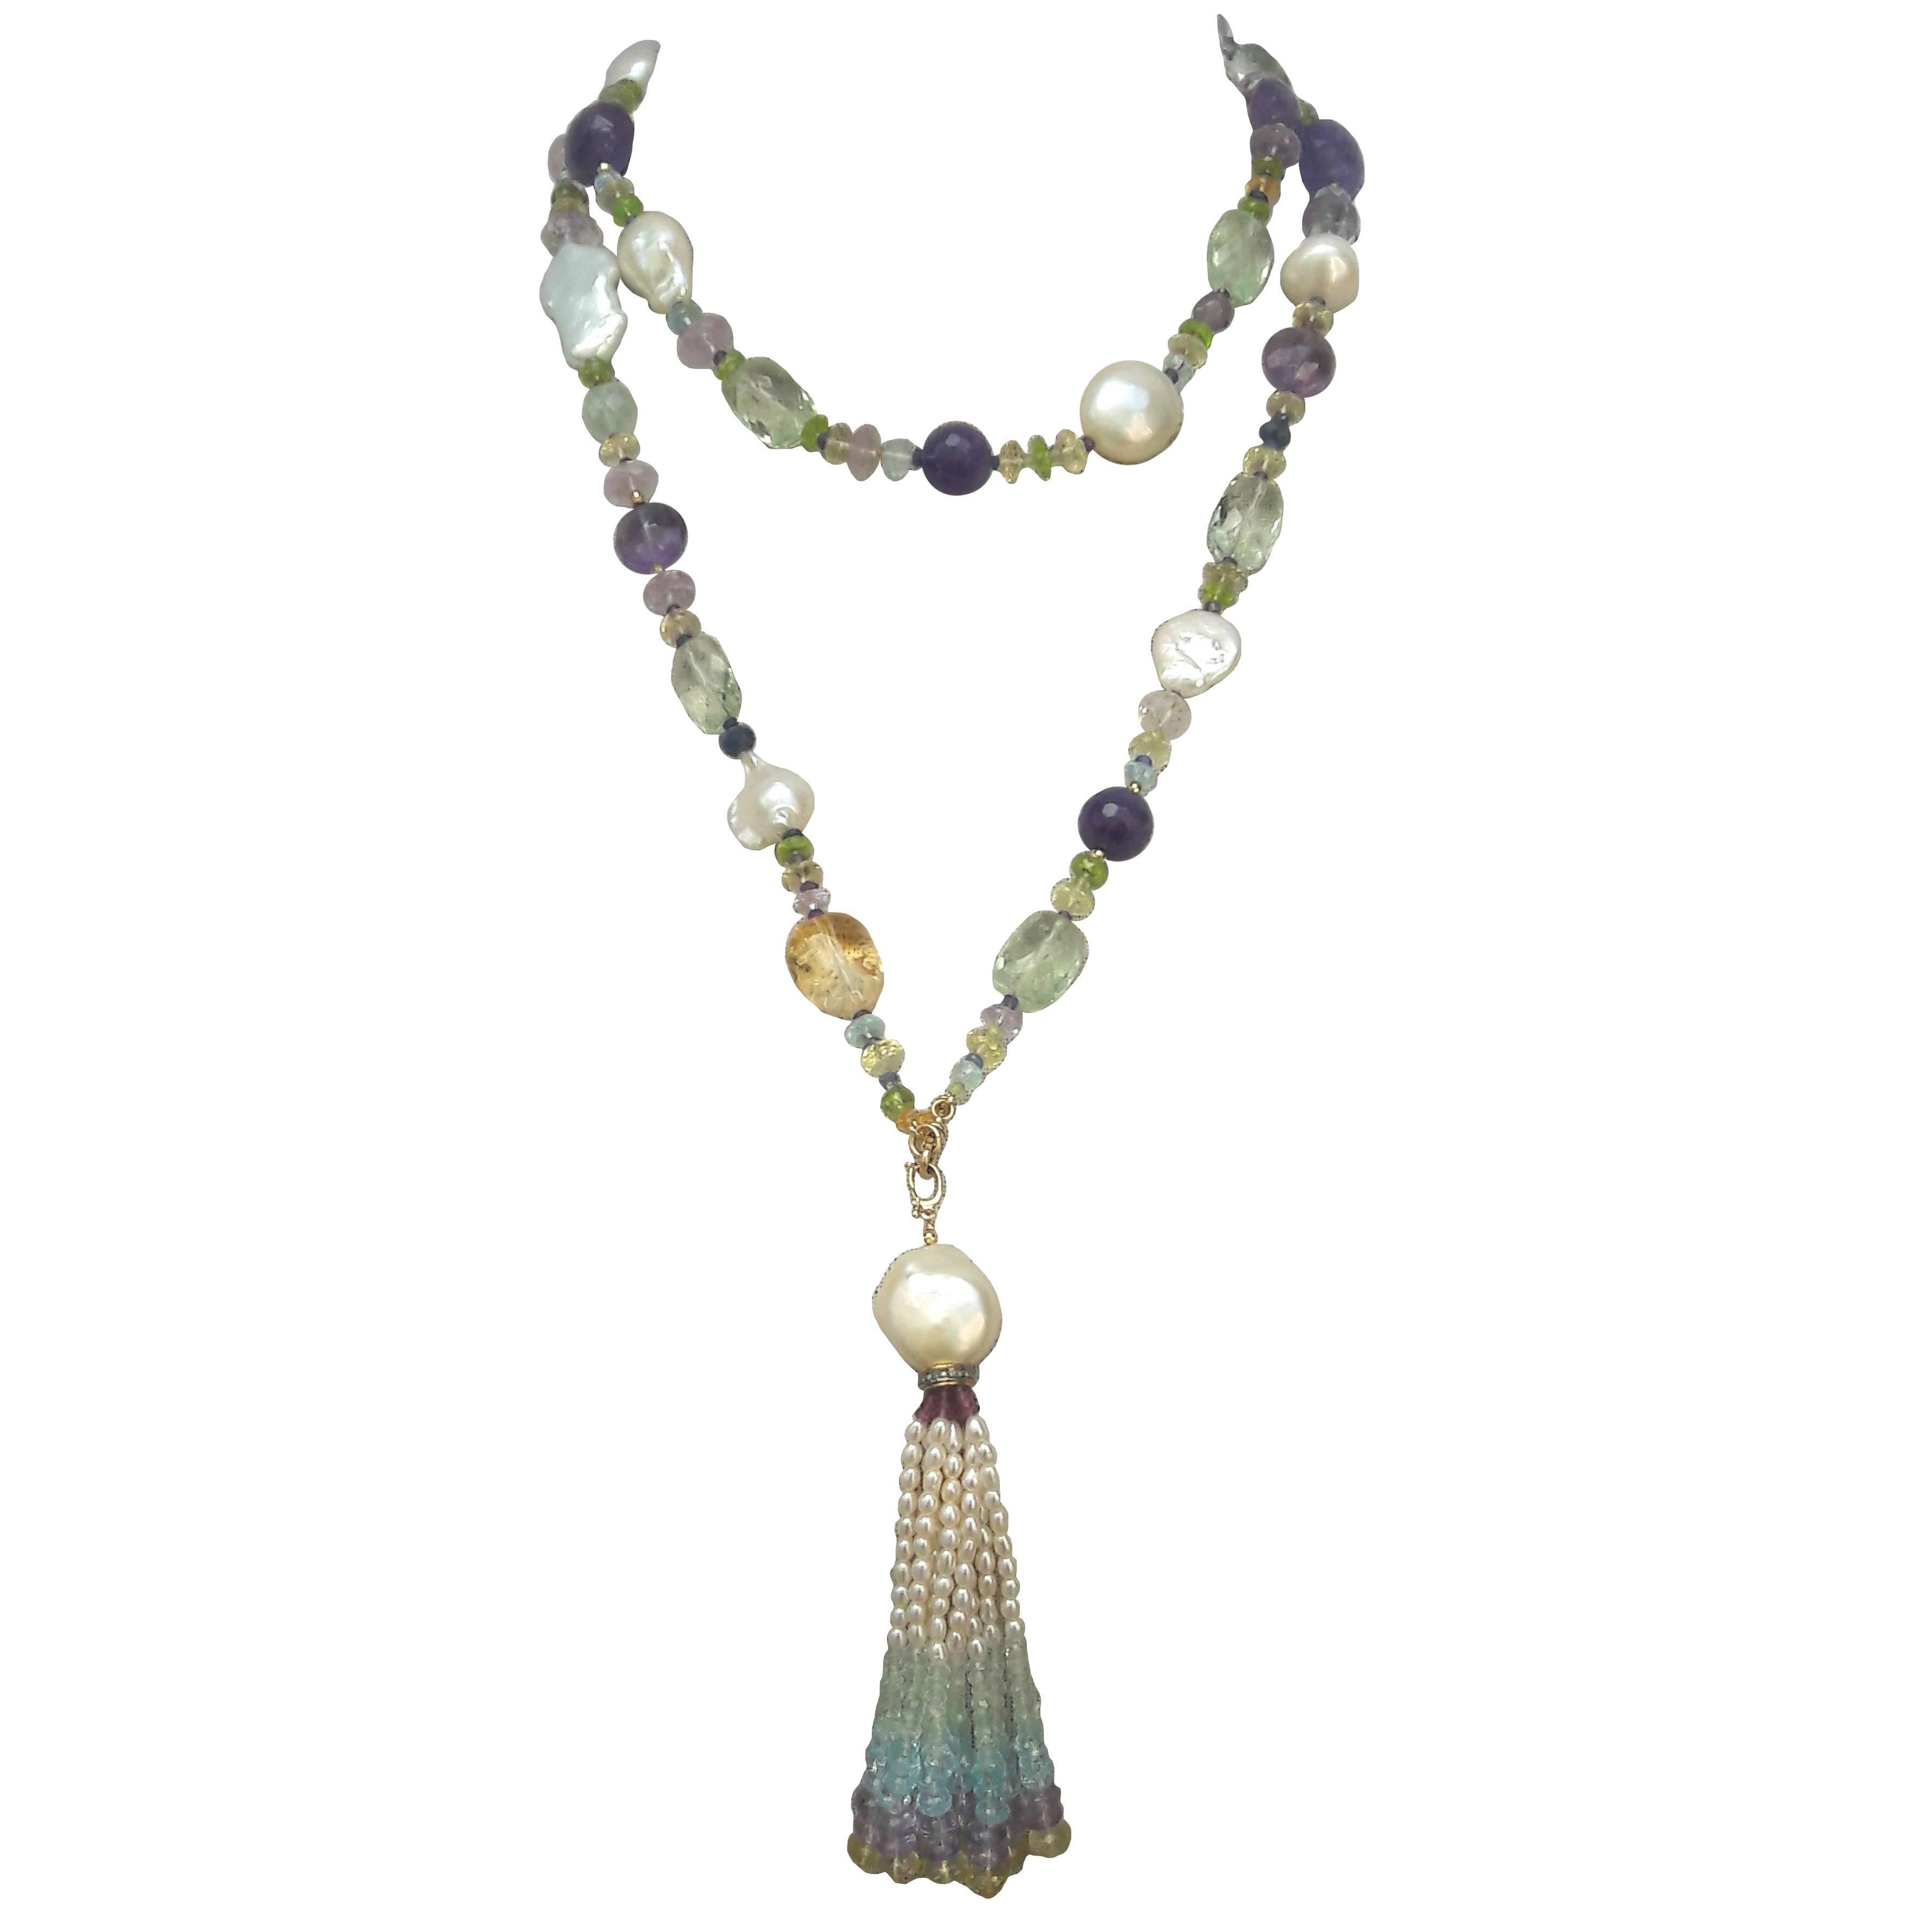 Pearl and Semiprecious Gemstones Long Lariat Necklace, 14K Gold Clasp & Tassel